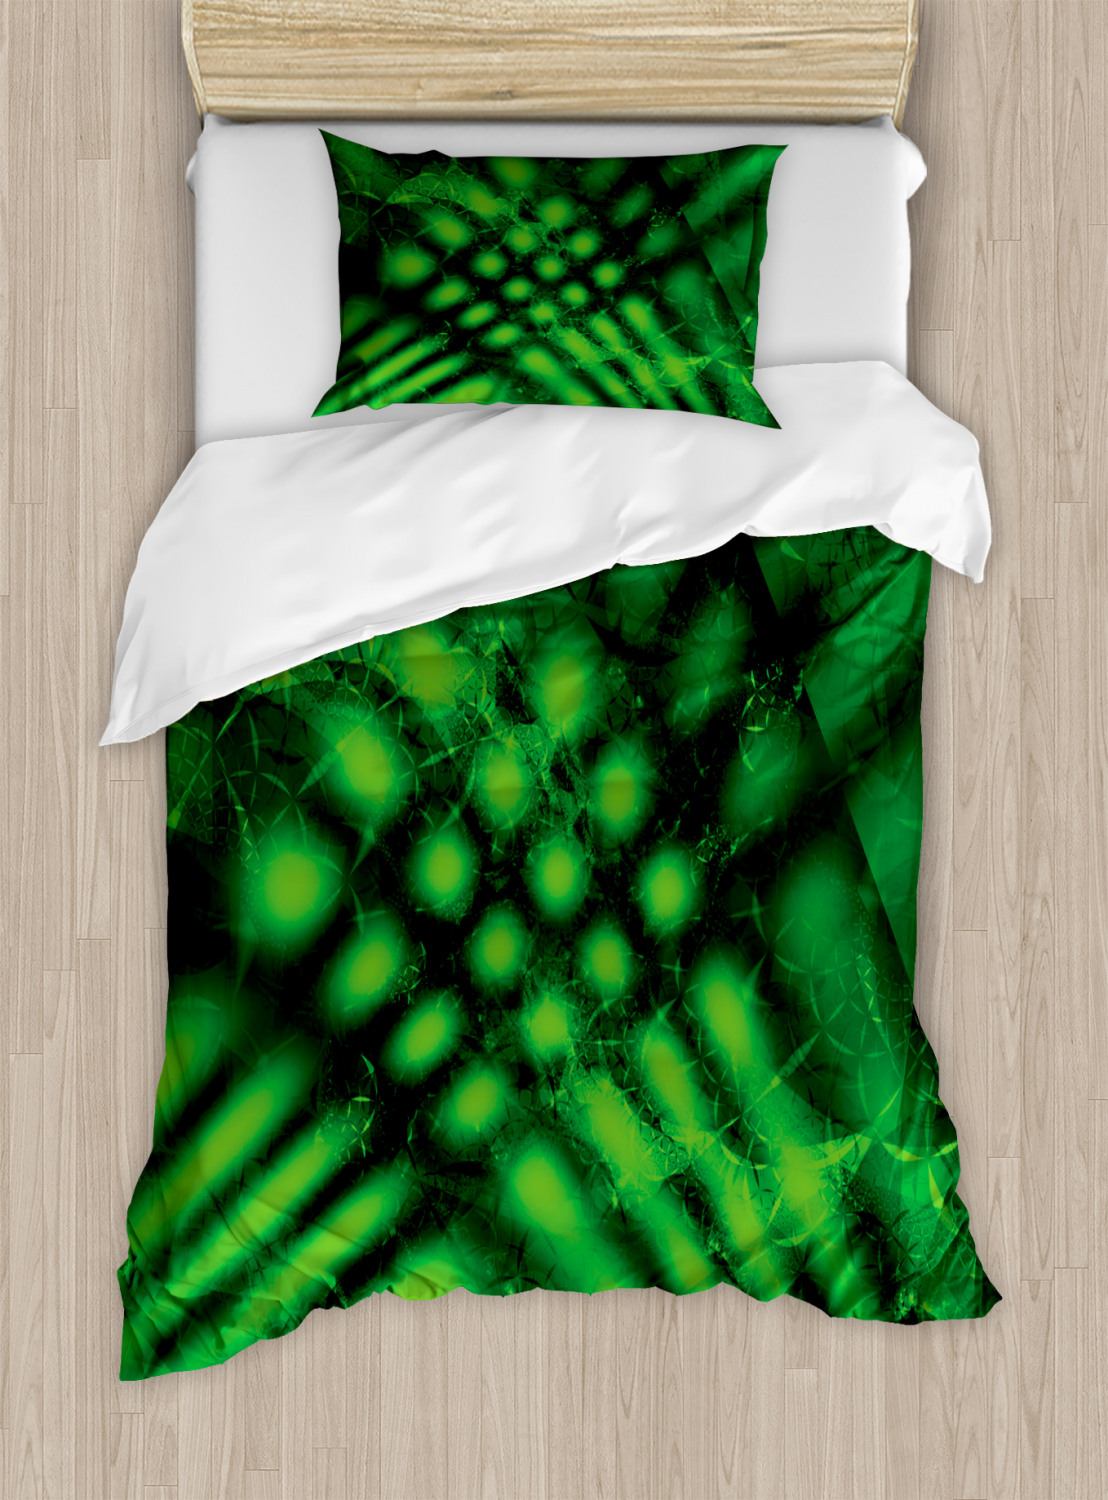 Lime Green Duvet Cover Set With Pillow Shams Psychedelic Blurry